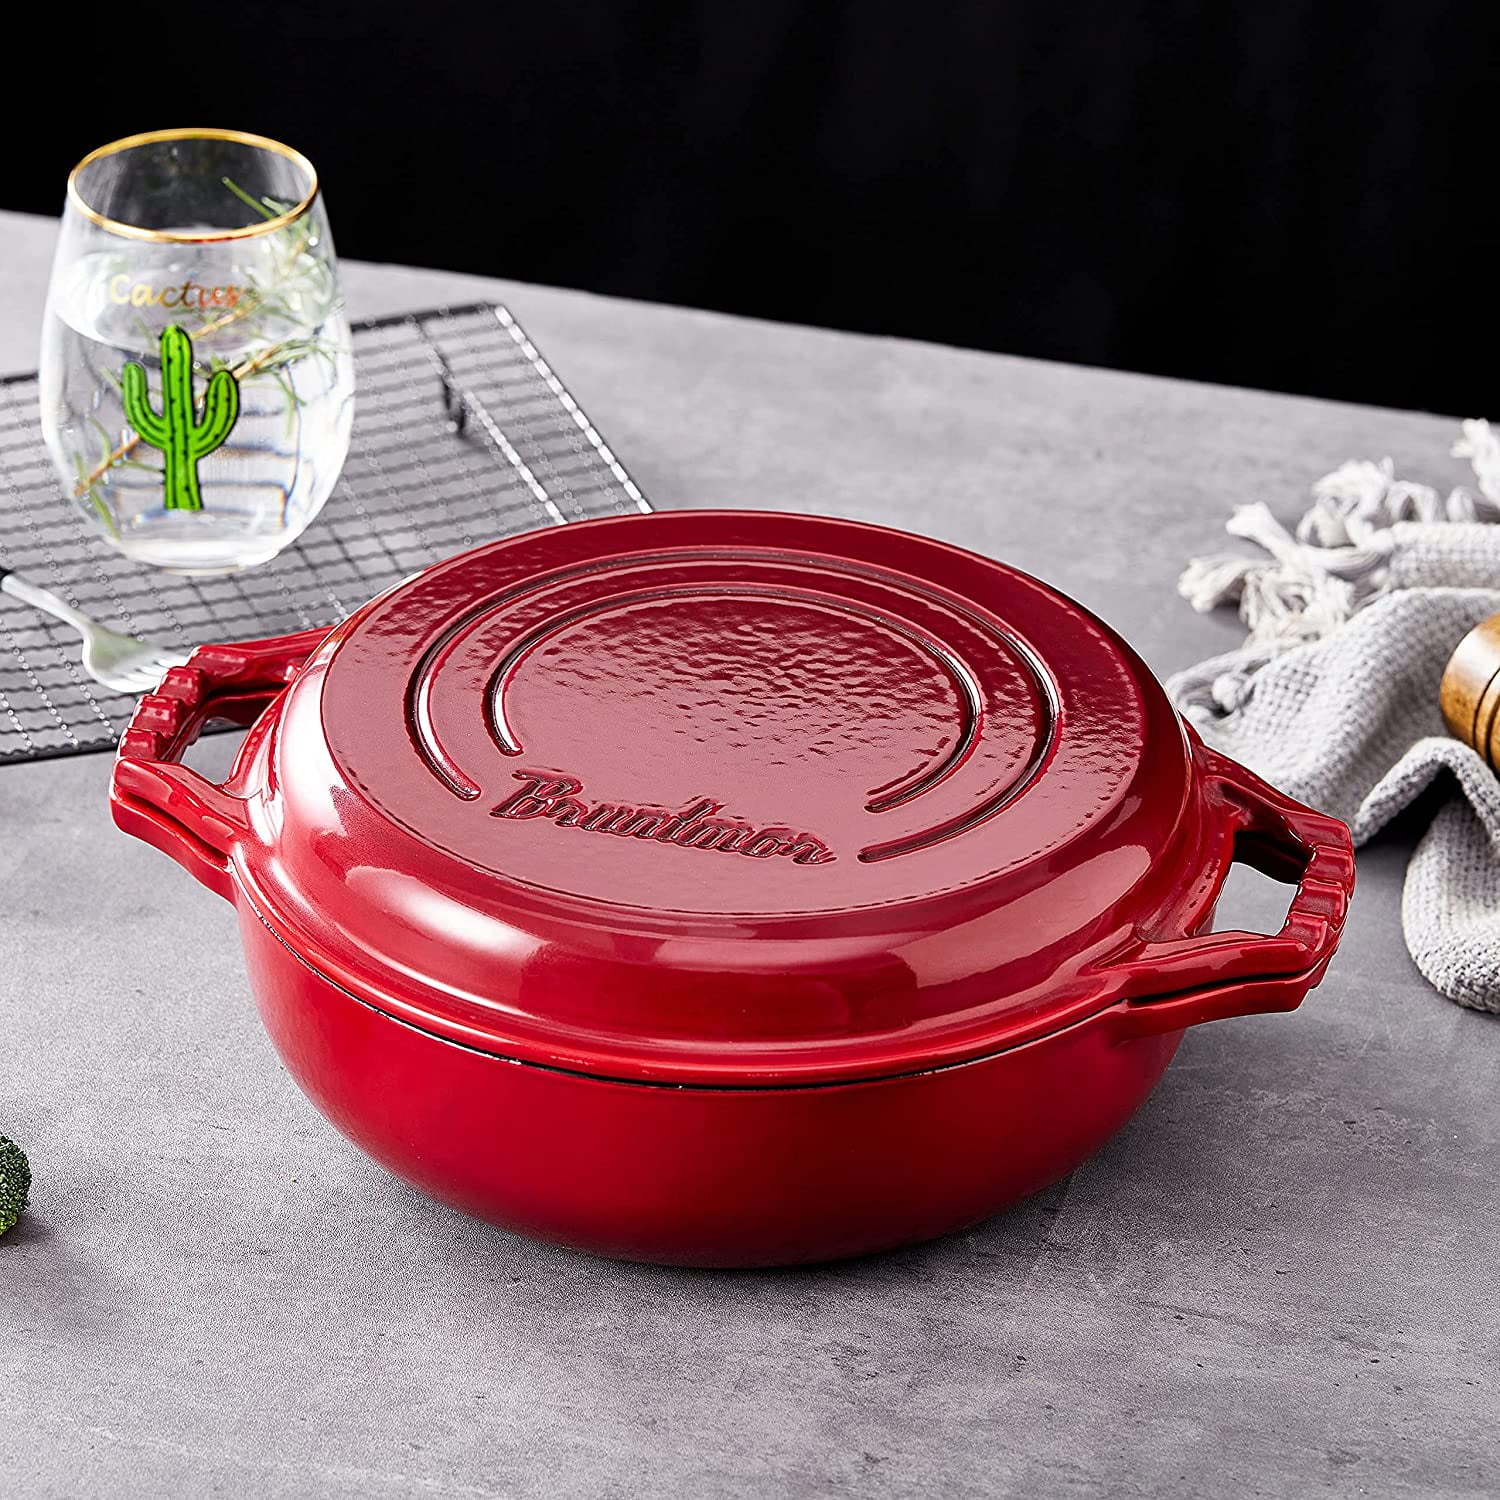 Bruntmor | 2-In-1 Enameled Cast Iron Cocotte Double Braiser Pan With Grill Lid - 2